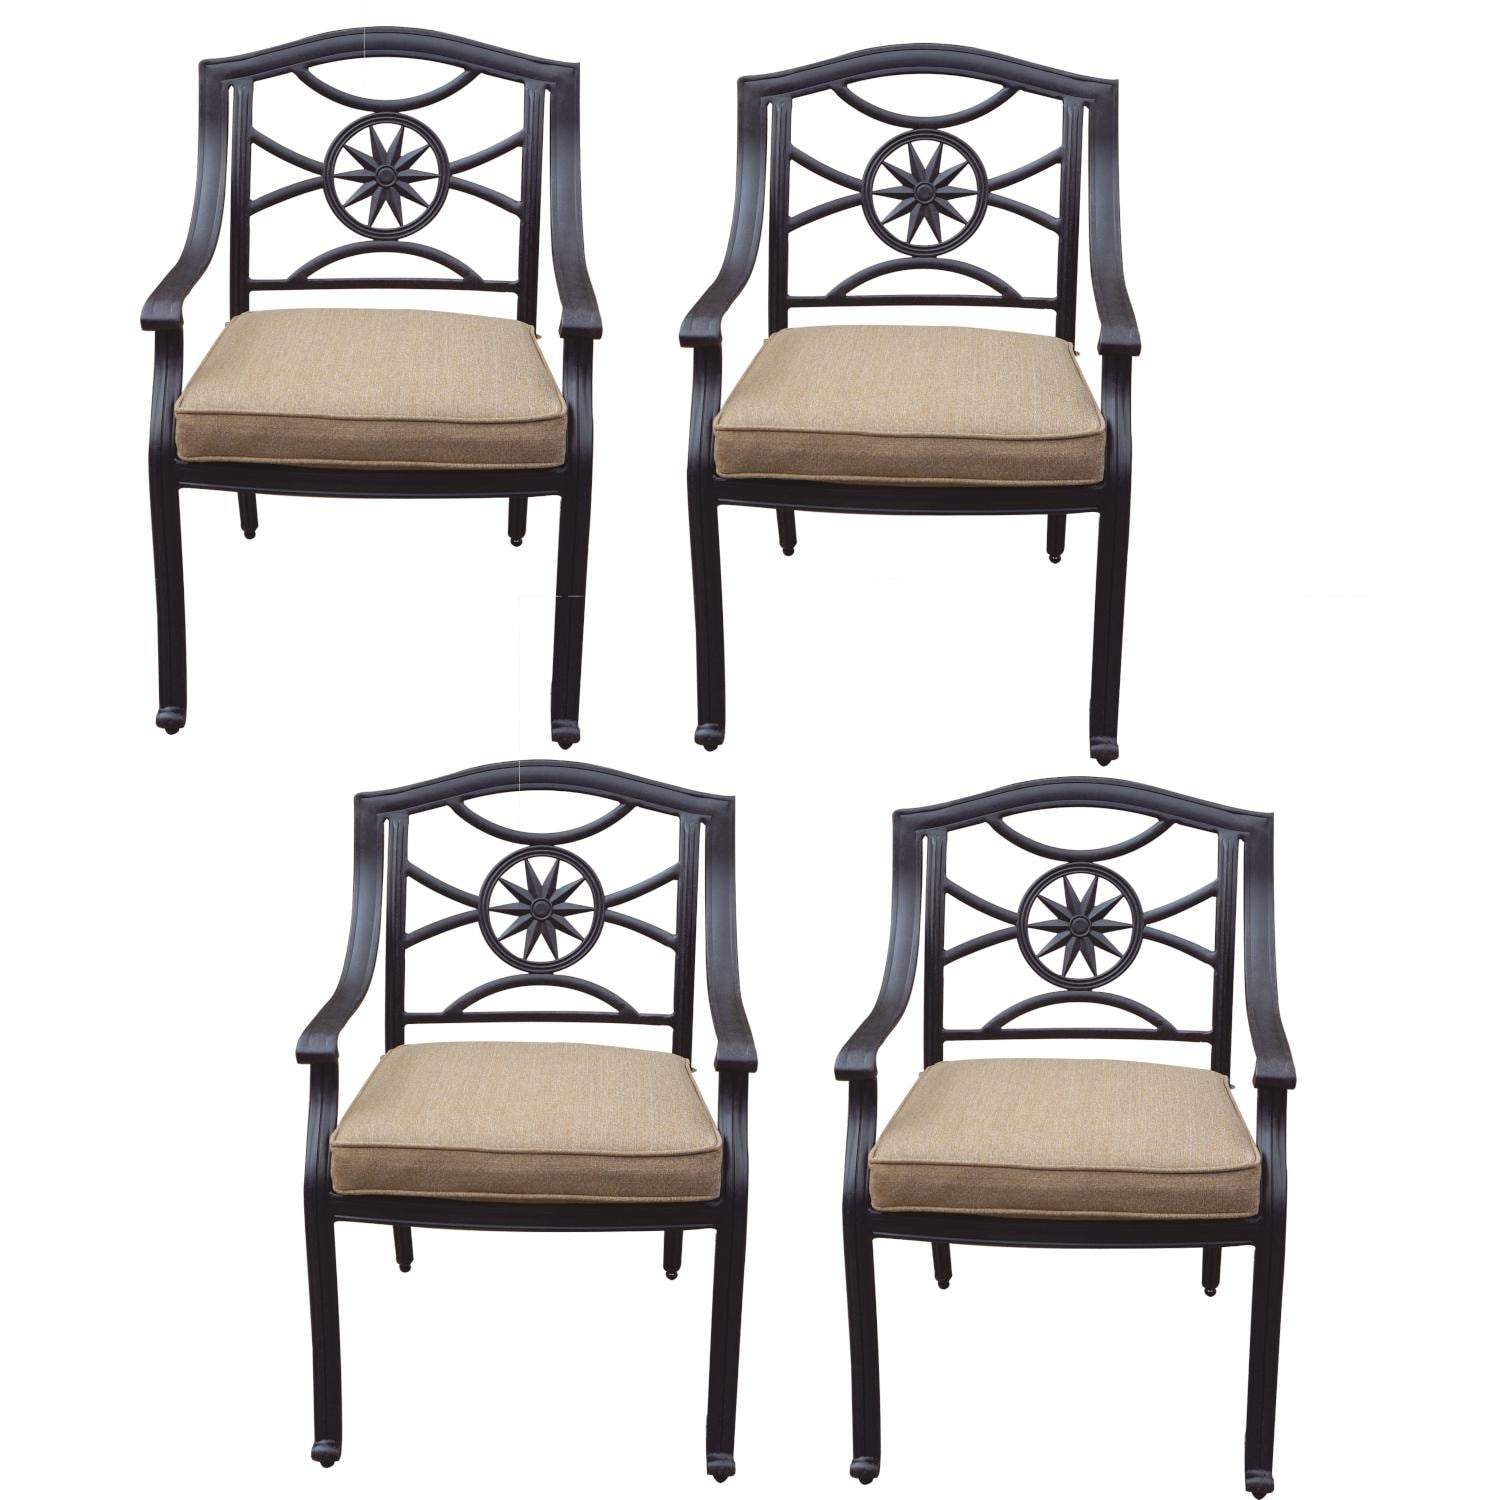 Darlee - Ten Star Stacking Patio Dining Chair with Cushion (Set of 4) - DL503-1-4